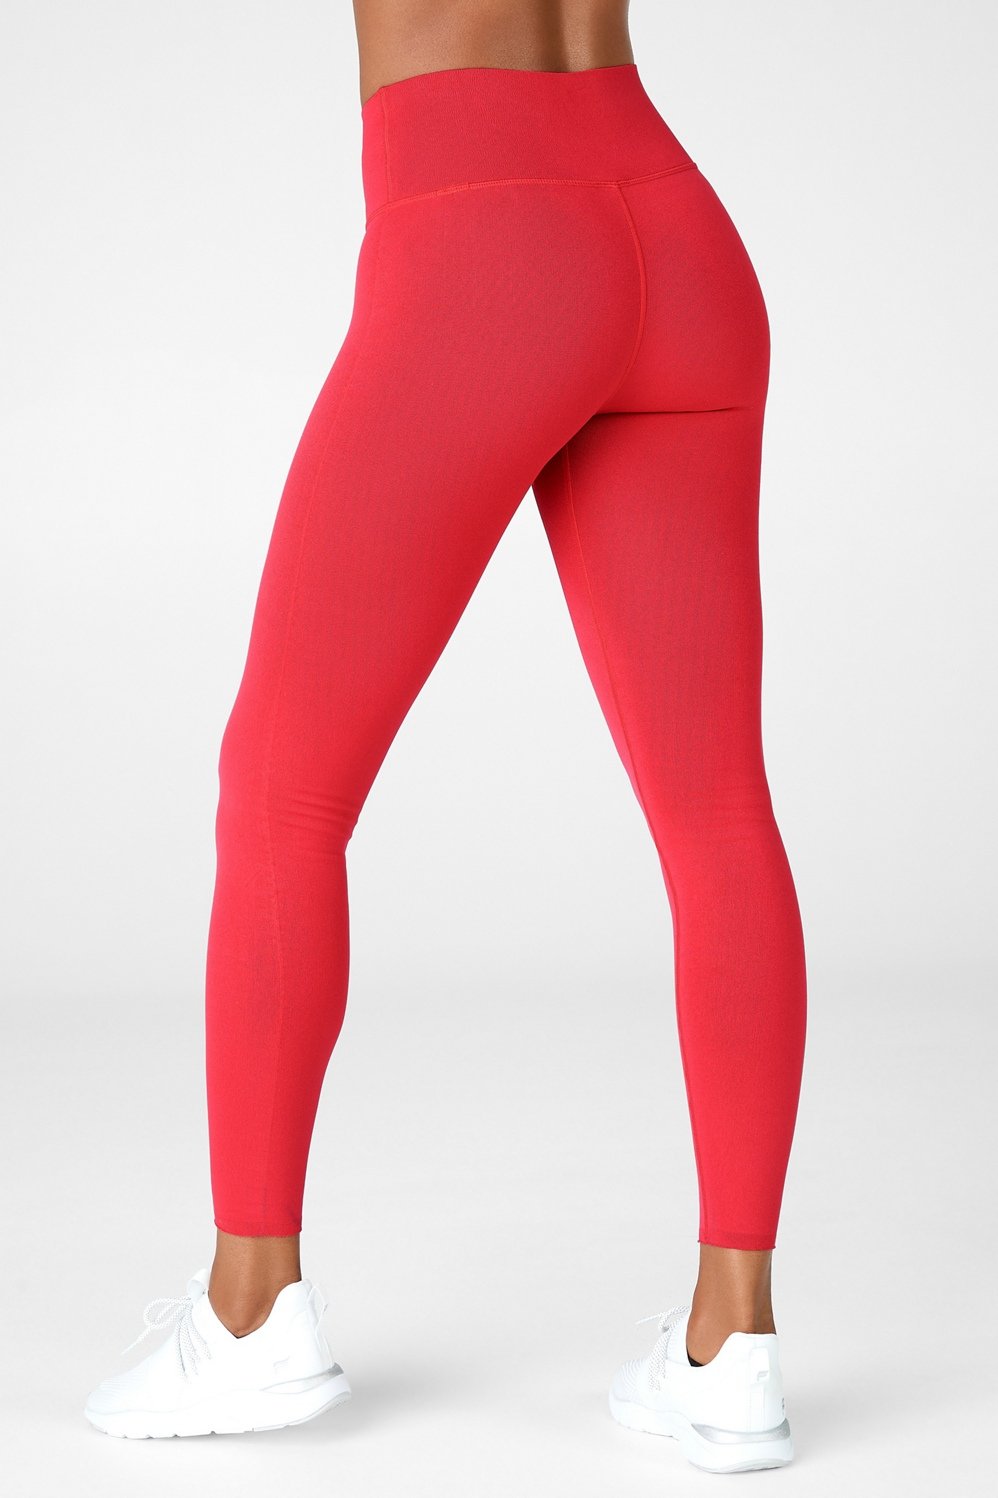 Fabletics - My Fabletics leggings accent the best parts of my